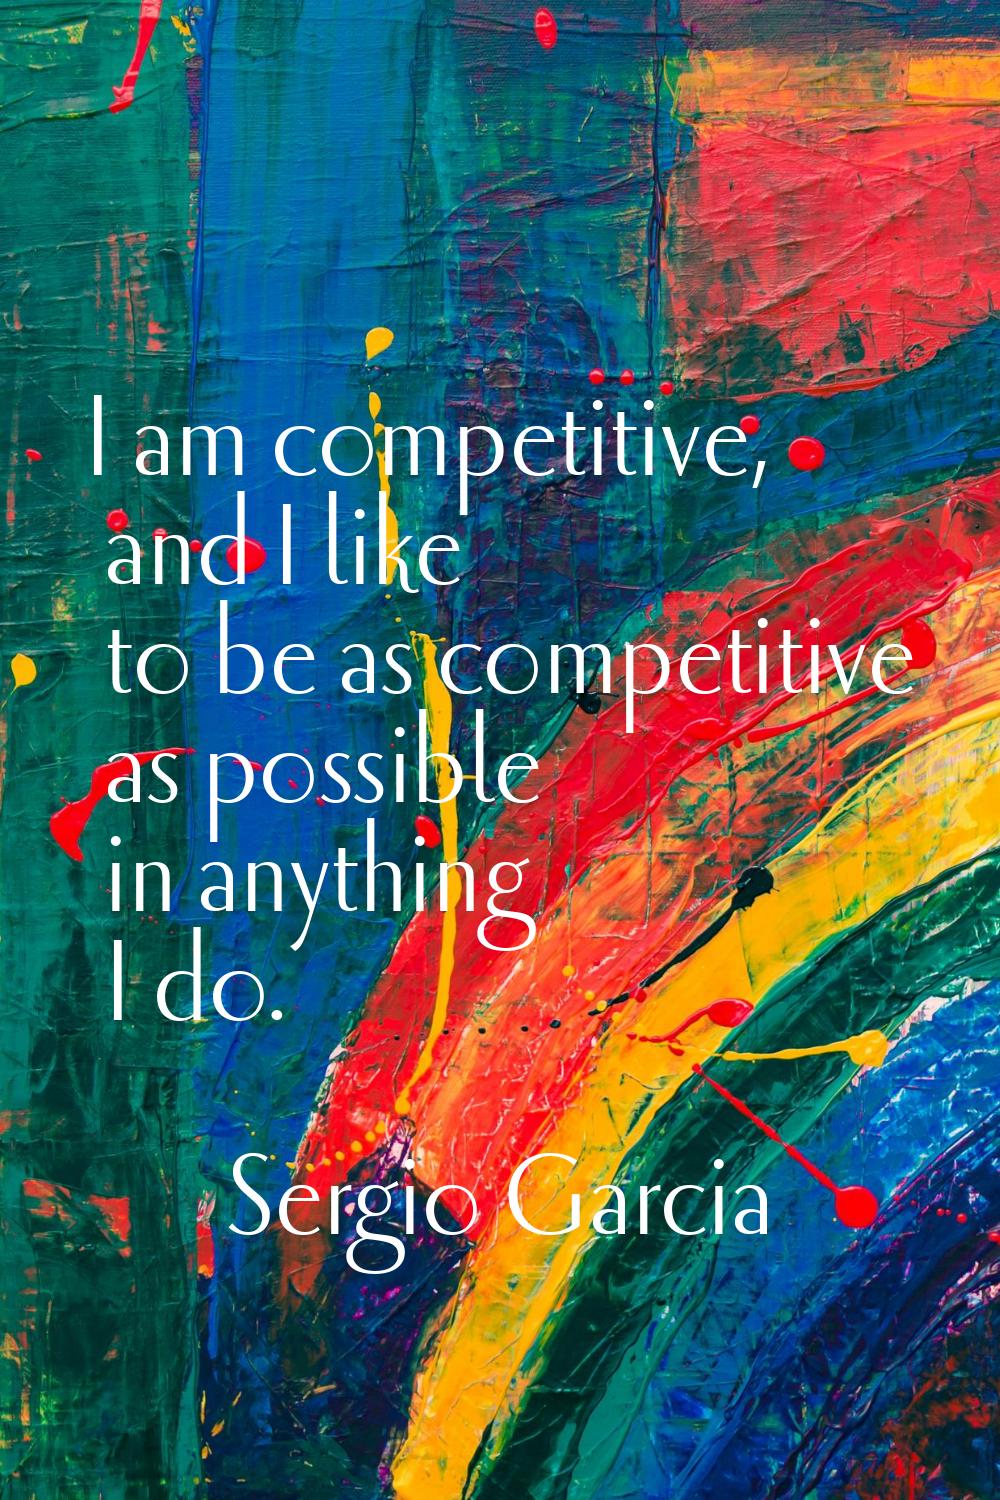 I am competitive, and I like to be as competitive as possible in anything I do.